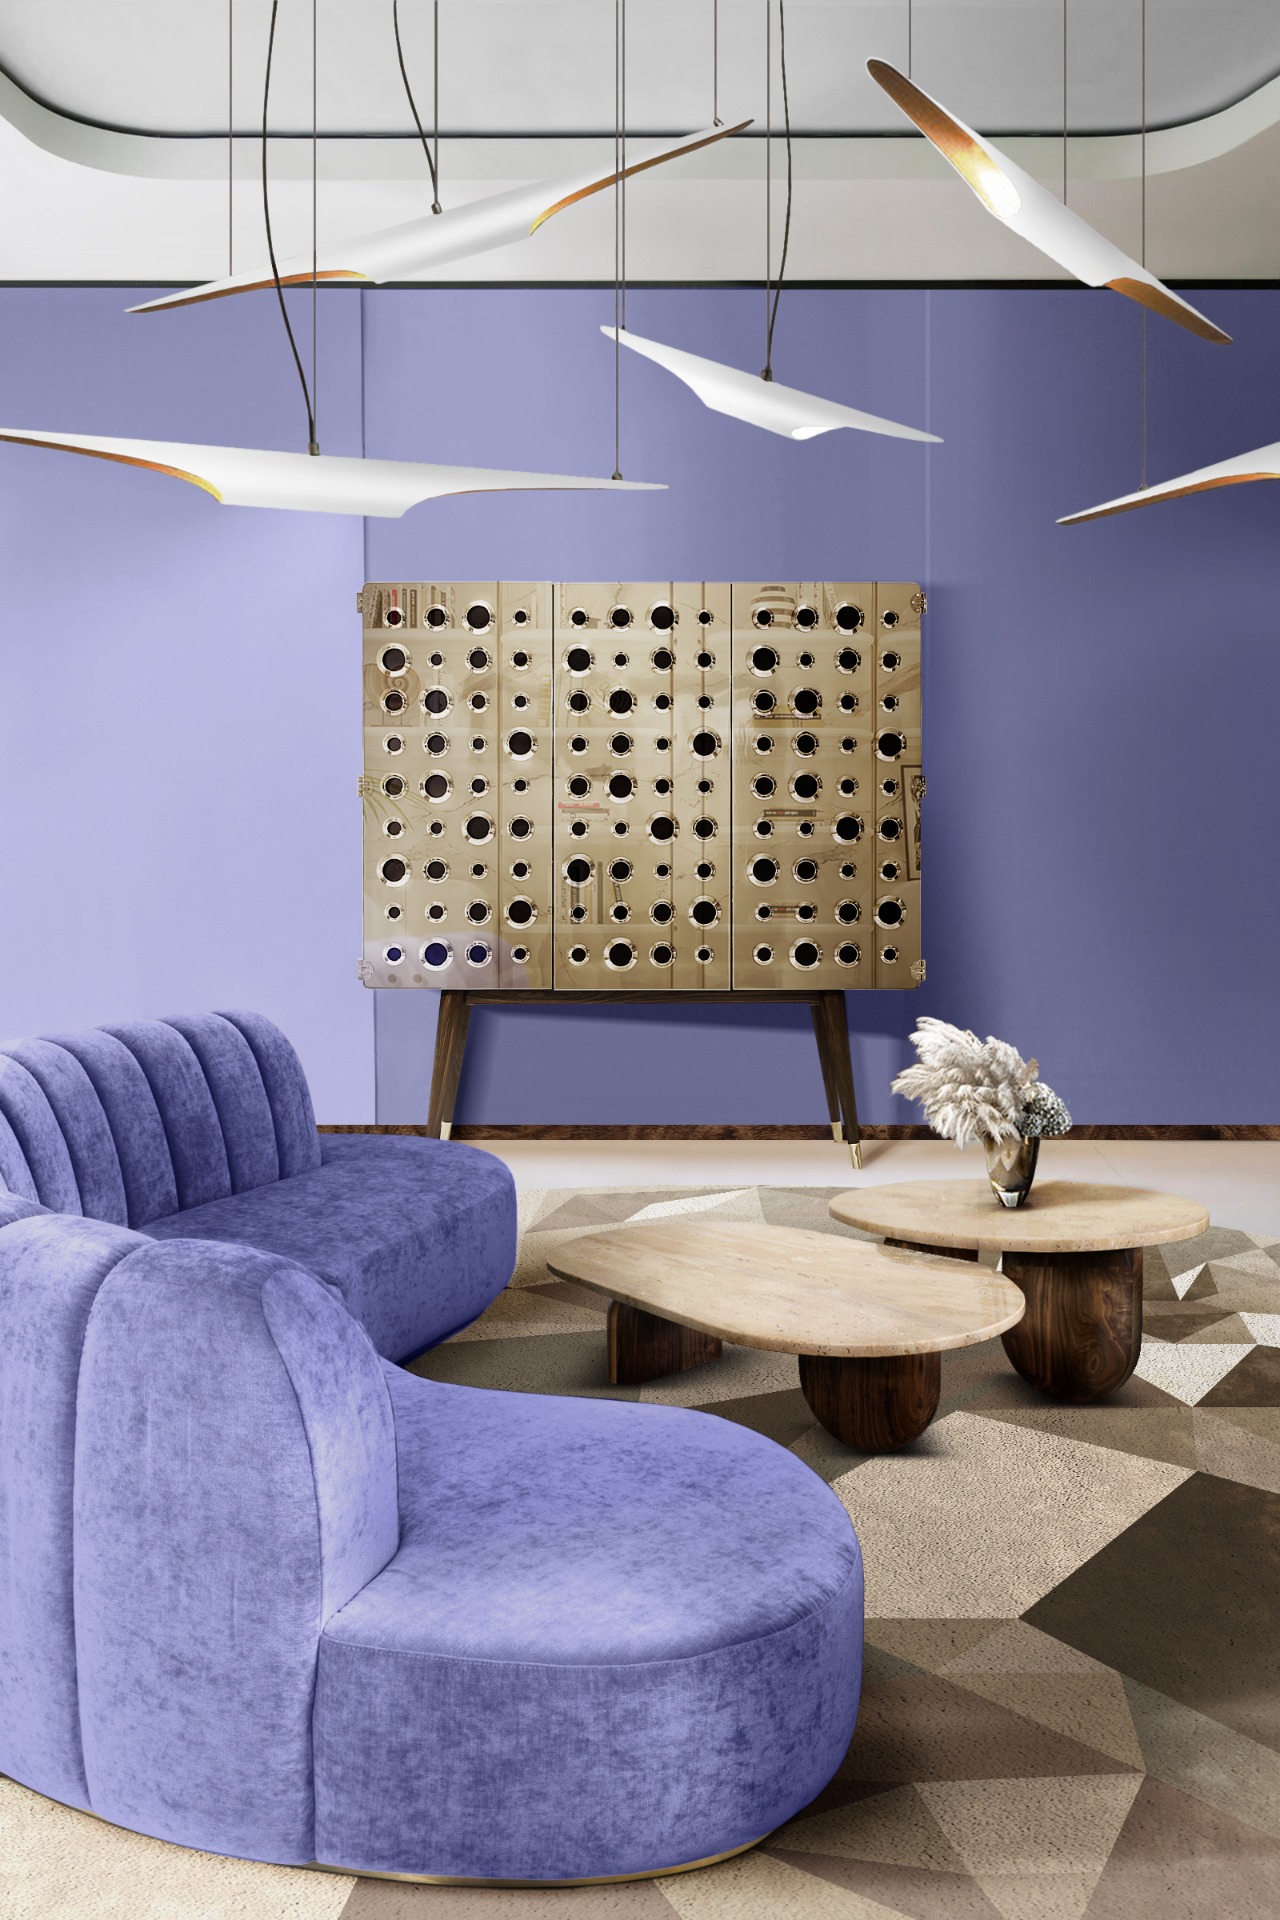 TRENDY INTERIORS WITH THIS NEW YEAR'S COLOUR